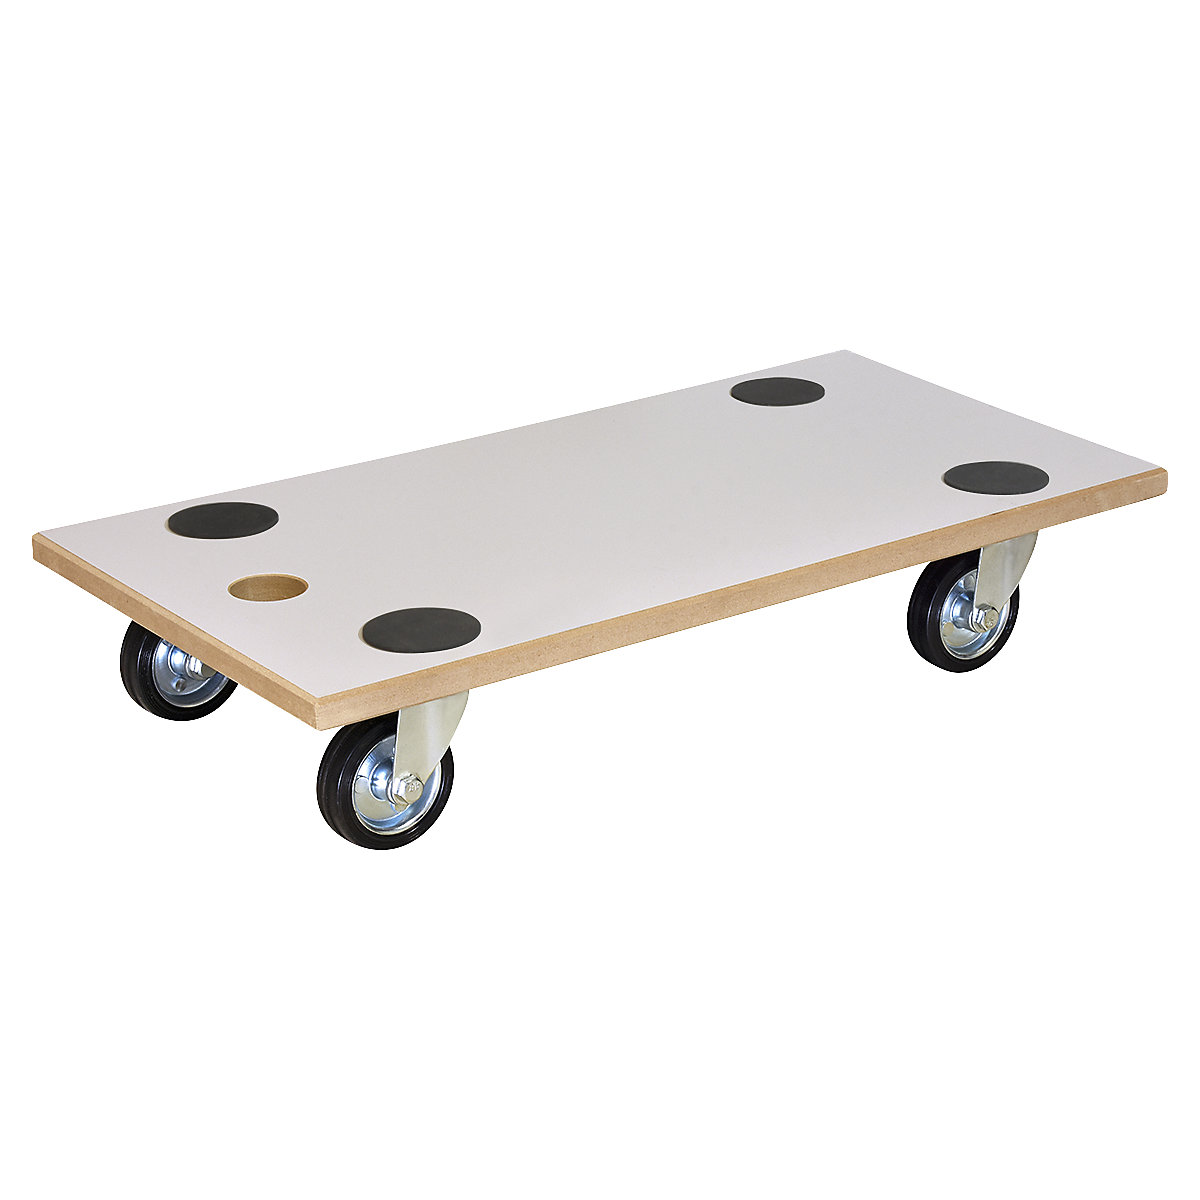 Transport dolly with grip hole – Wagner, MM 1316, castors for soft floors, pack of 2, LxW 575 x 300 mm, 5+ packs-5